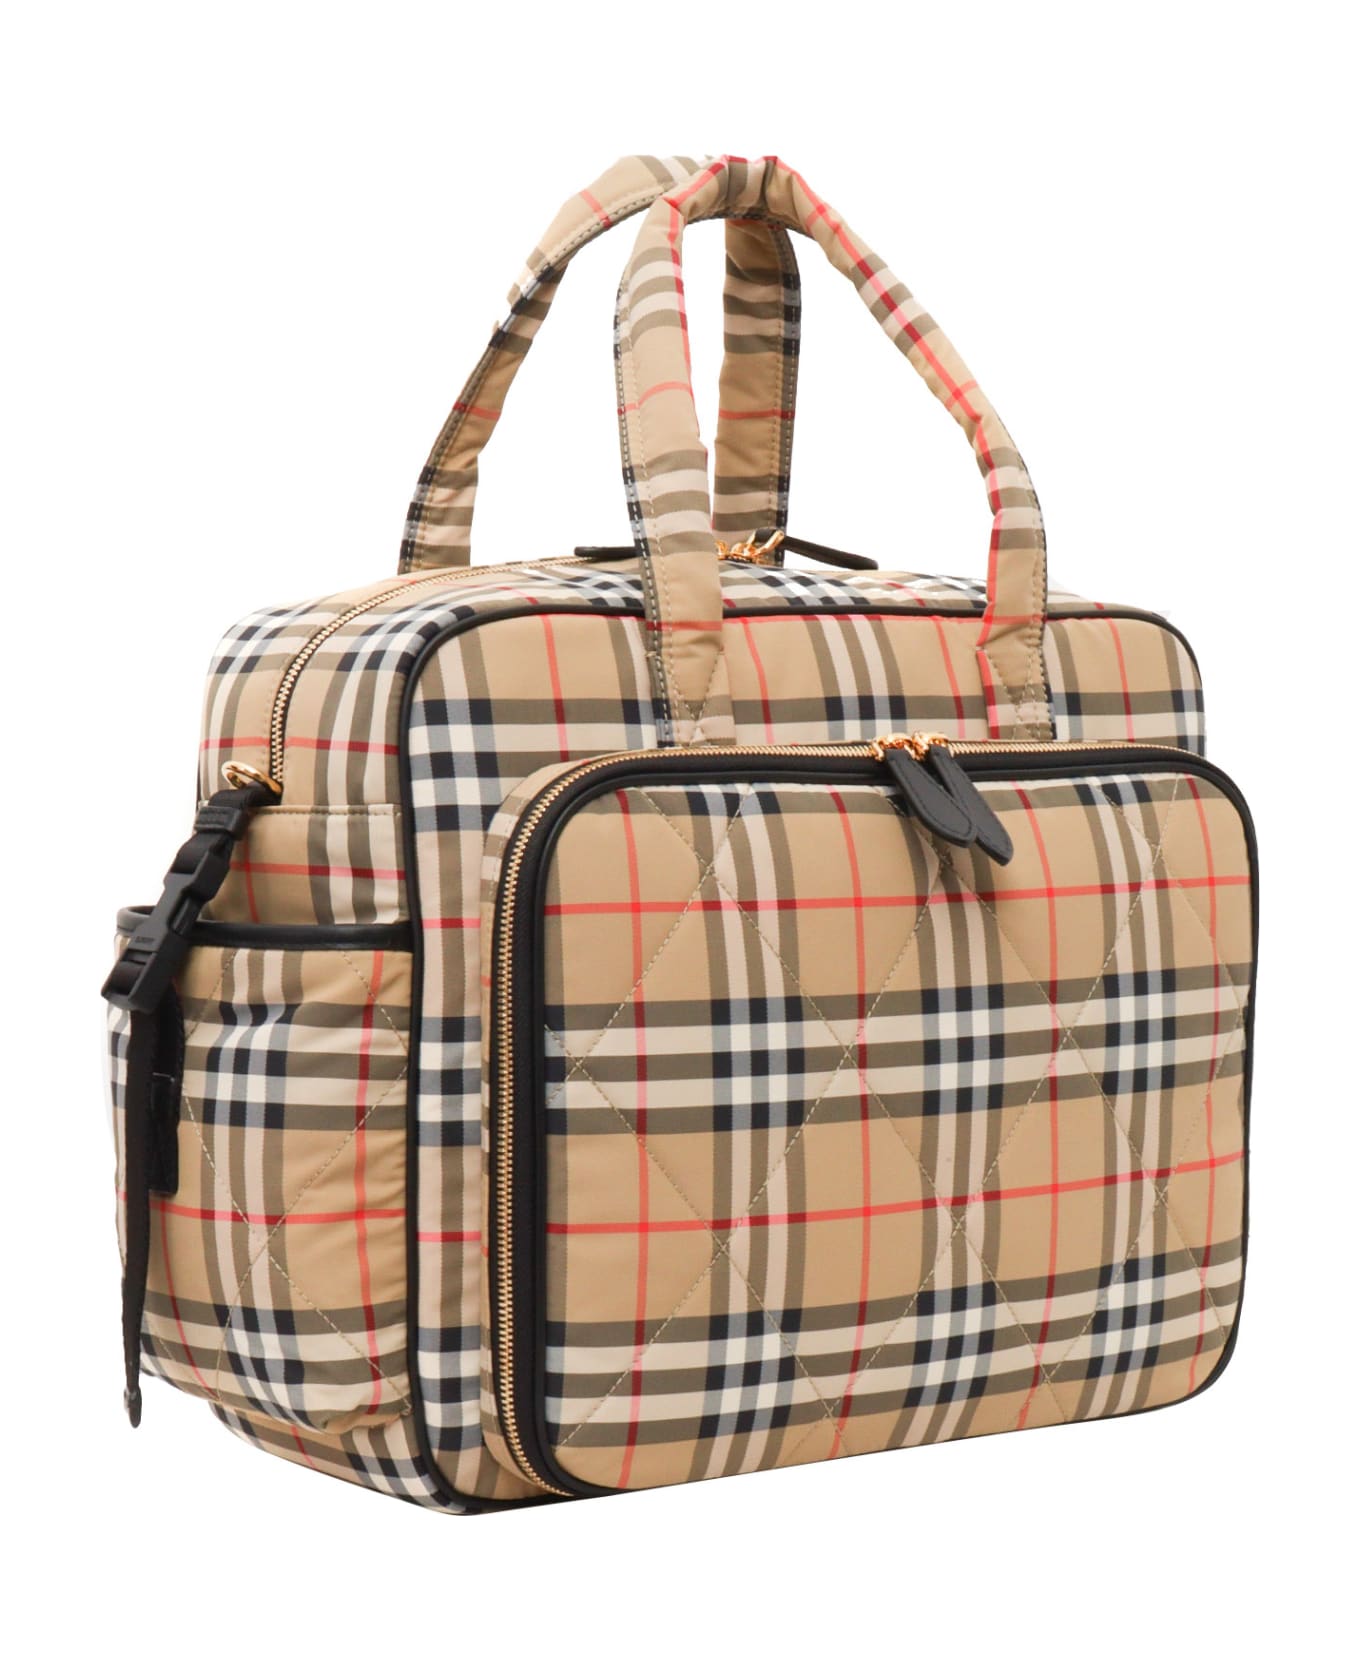 Burberry Check Pattern Bag - BEIGE